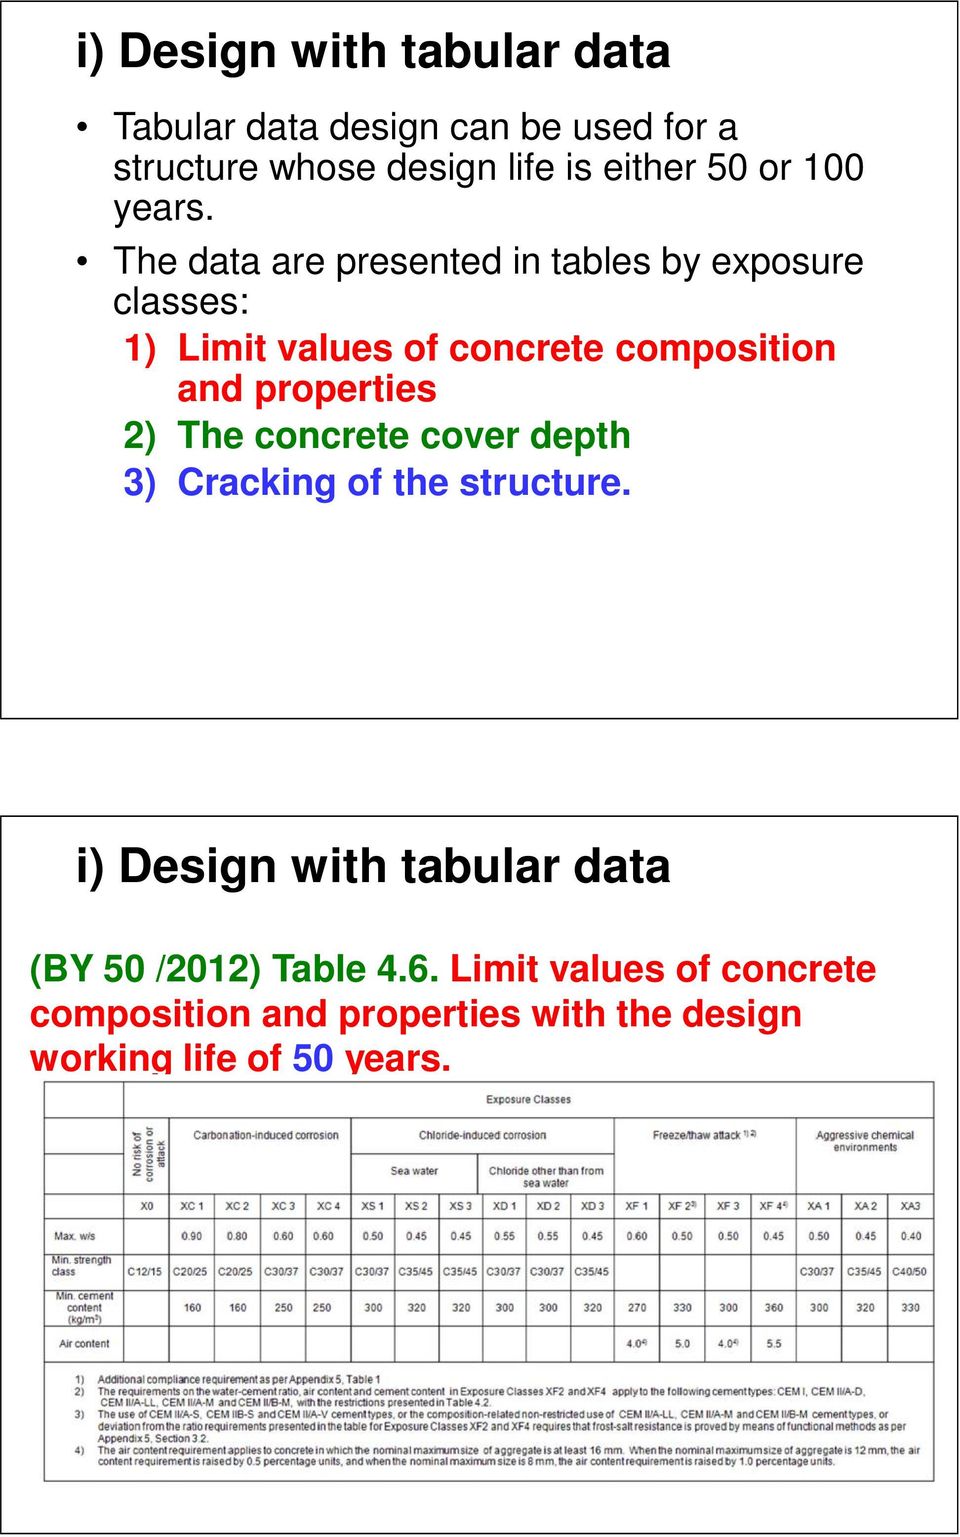 The data are presented in tables by exposure classes: 1) Limit values of concrete composition and properties